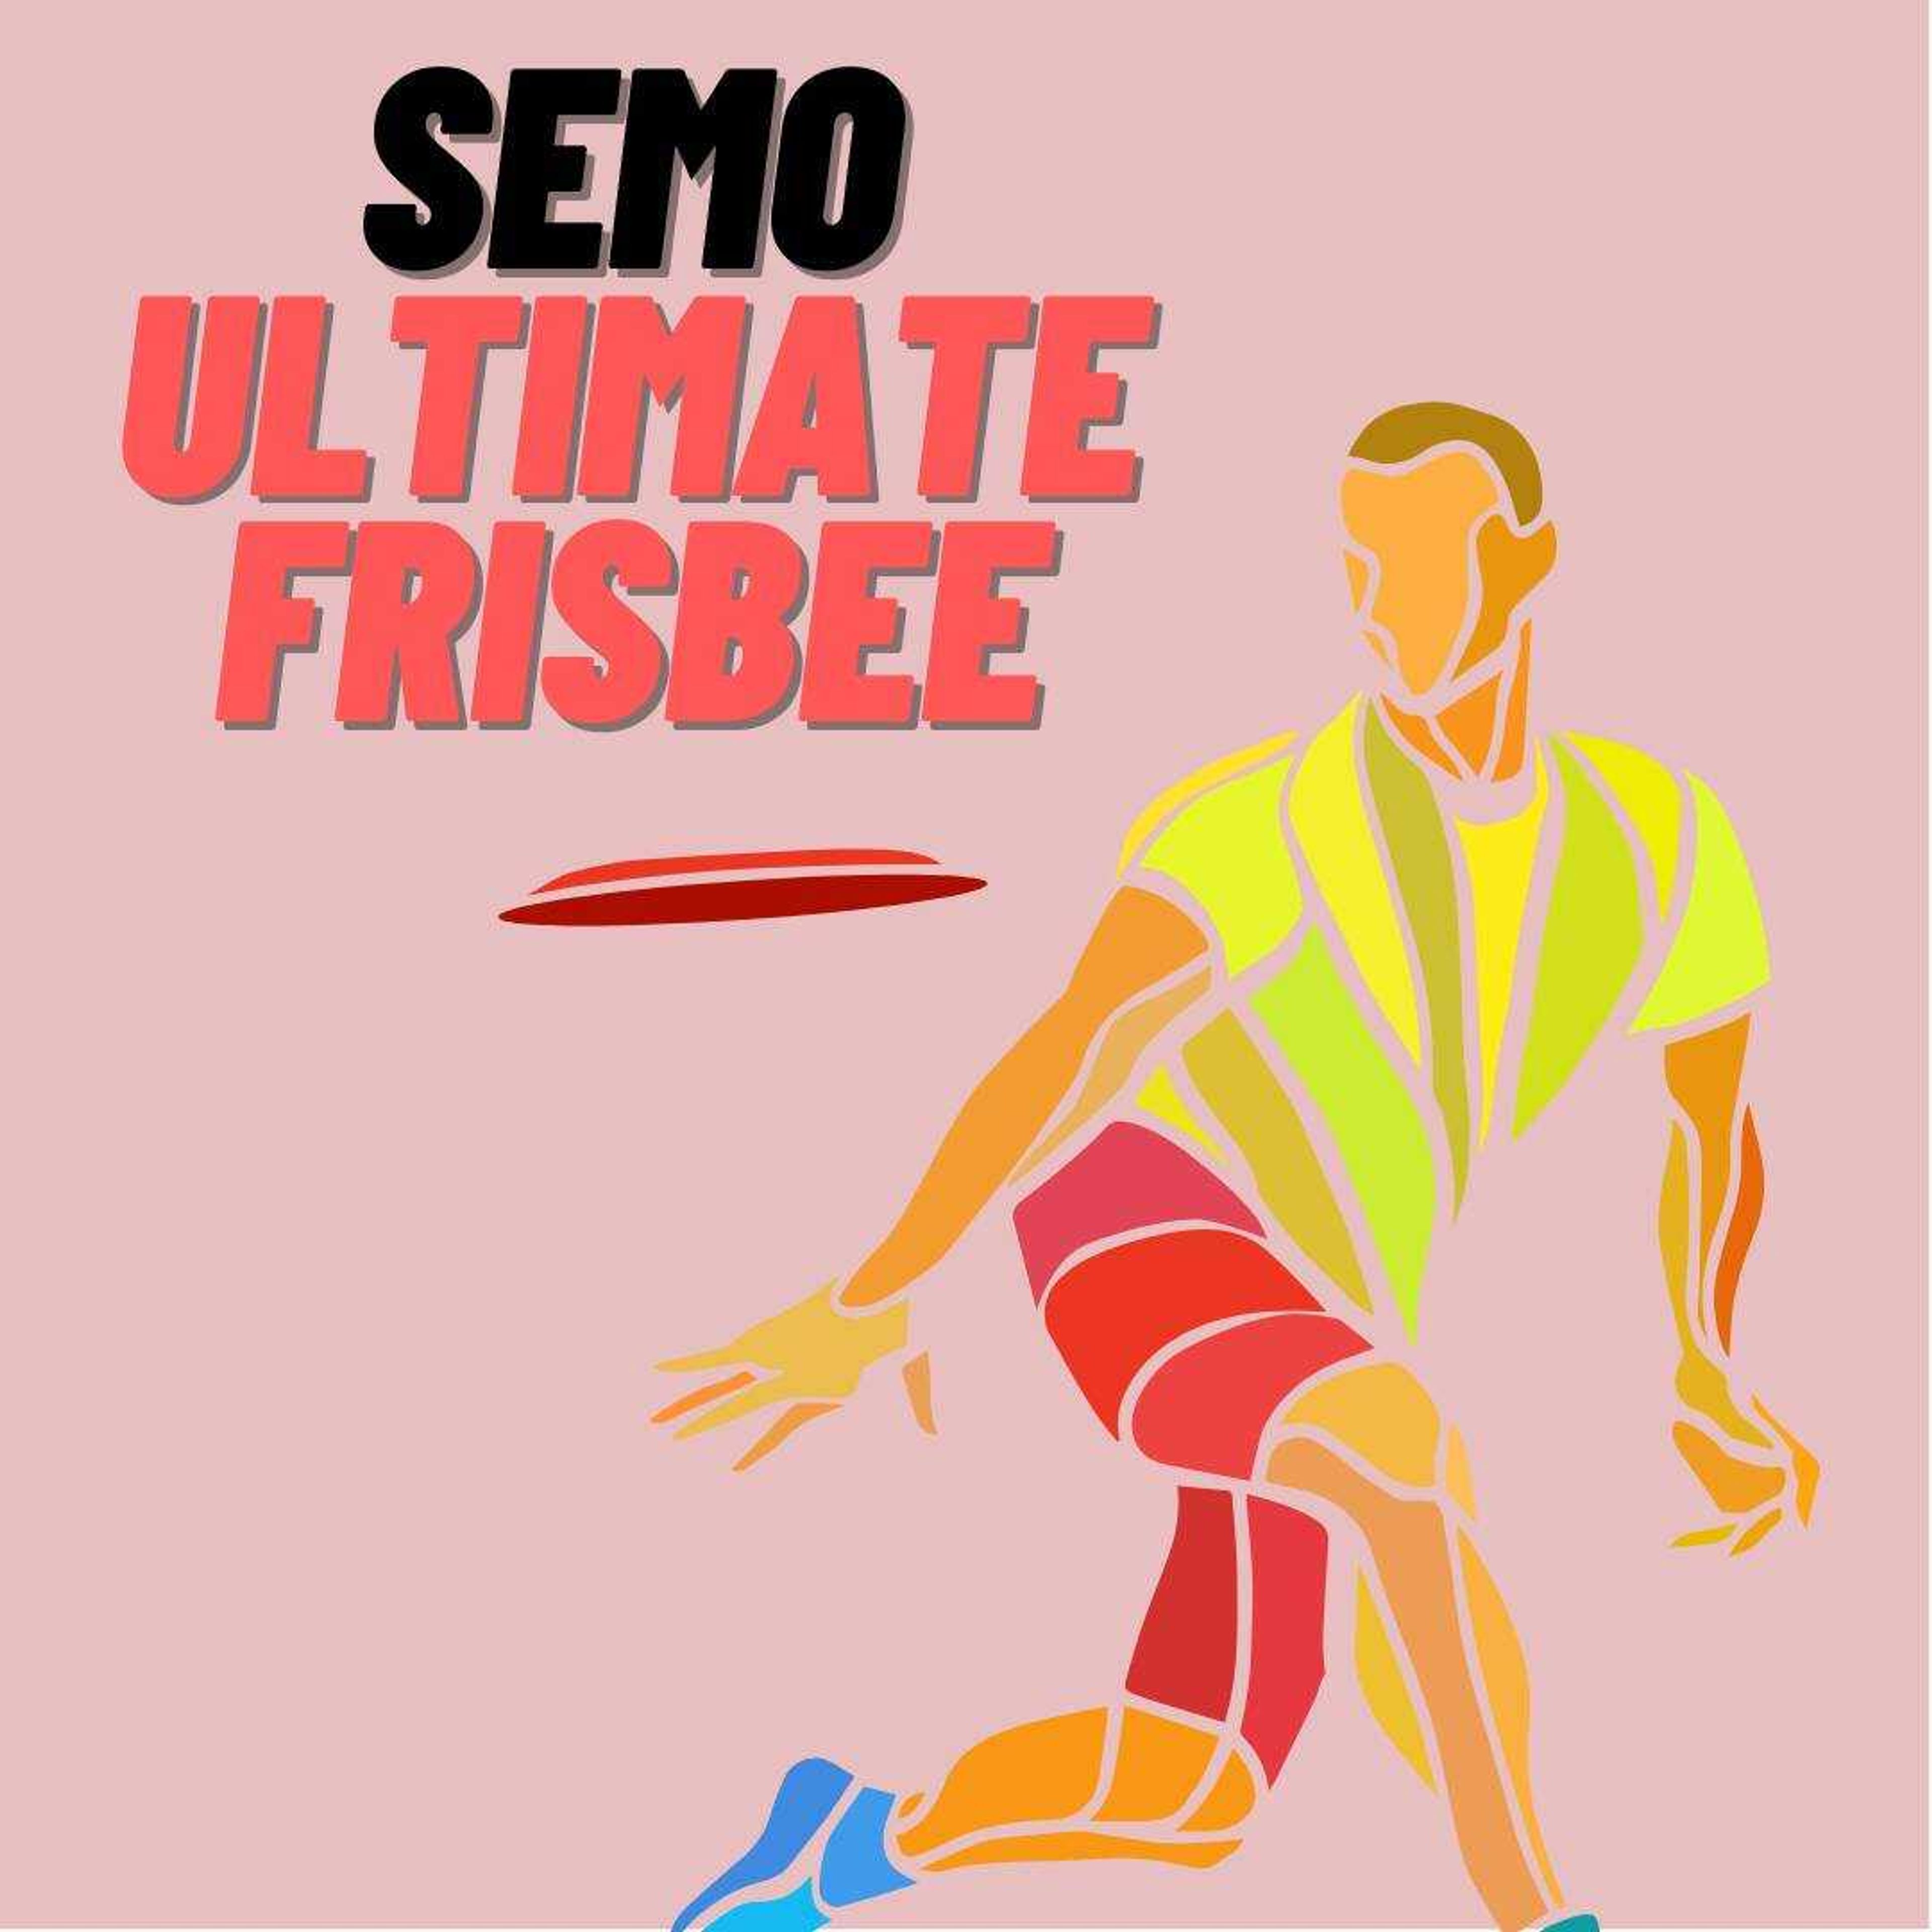 The club, community of SEMO Ultimate Frisbee